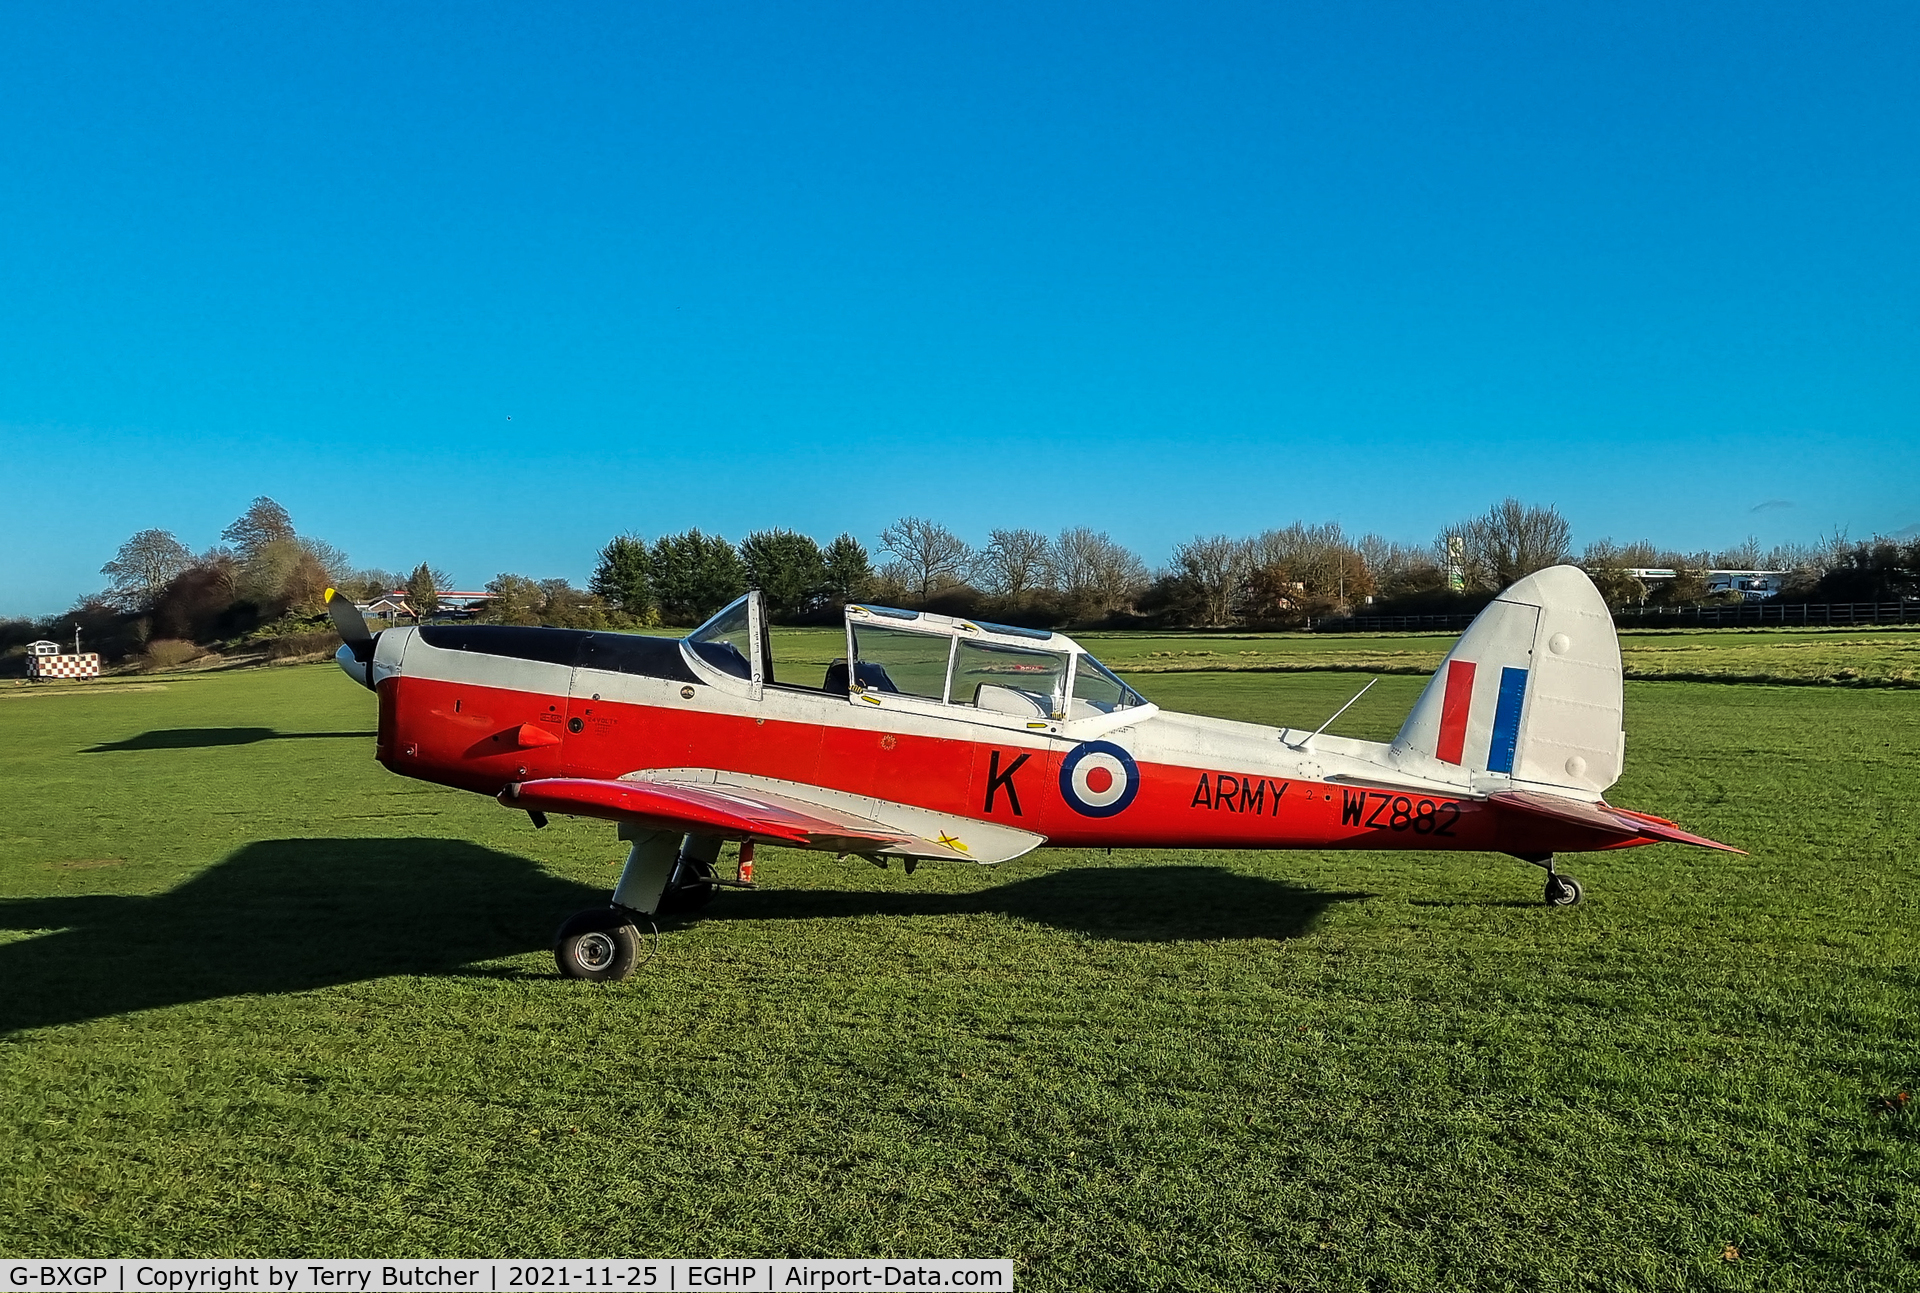 G-BXGP, 1953 De Havilland DHC-1 Chipmunk T.10 C/N C1/0927, Just prior to a local flight from Popham Airfield at 14.00 on 25 Nov 2021 with pilot Simon Tilling and passenger Terry Butcher